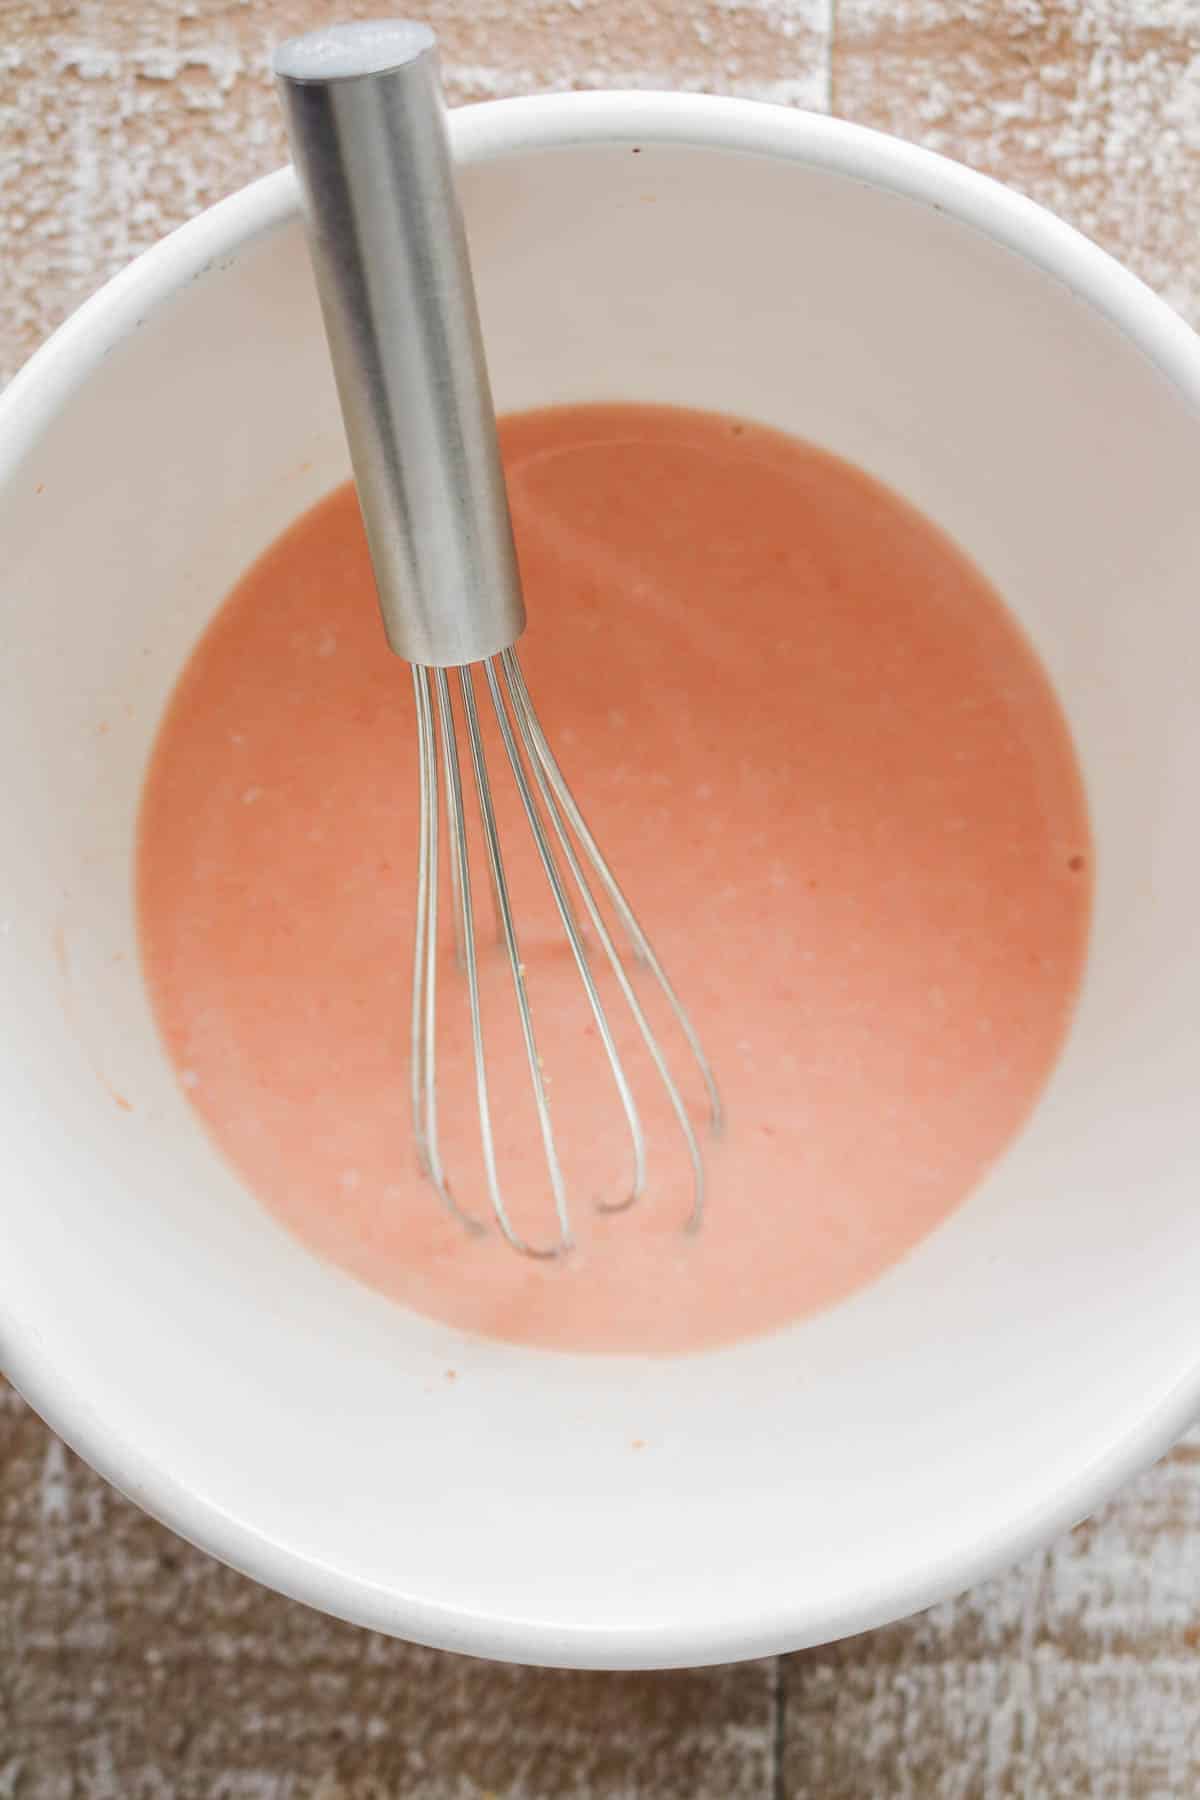 Buttermilk with hot sauce in a bowl with a whisk.